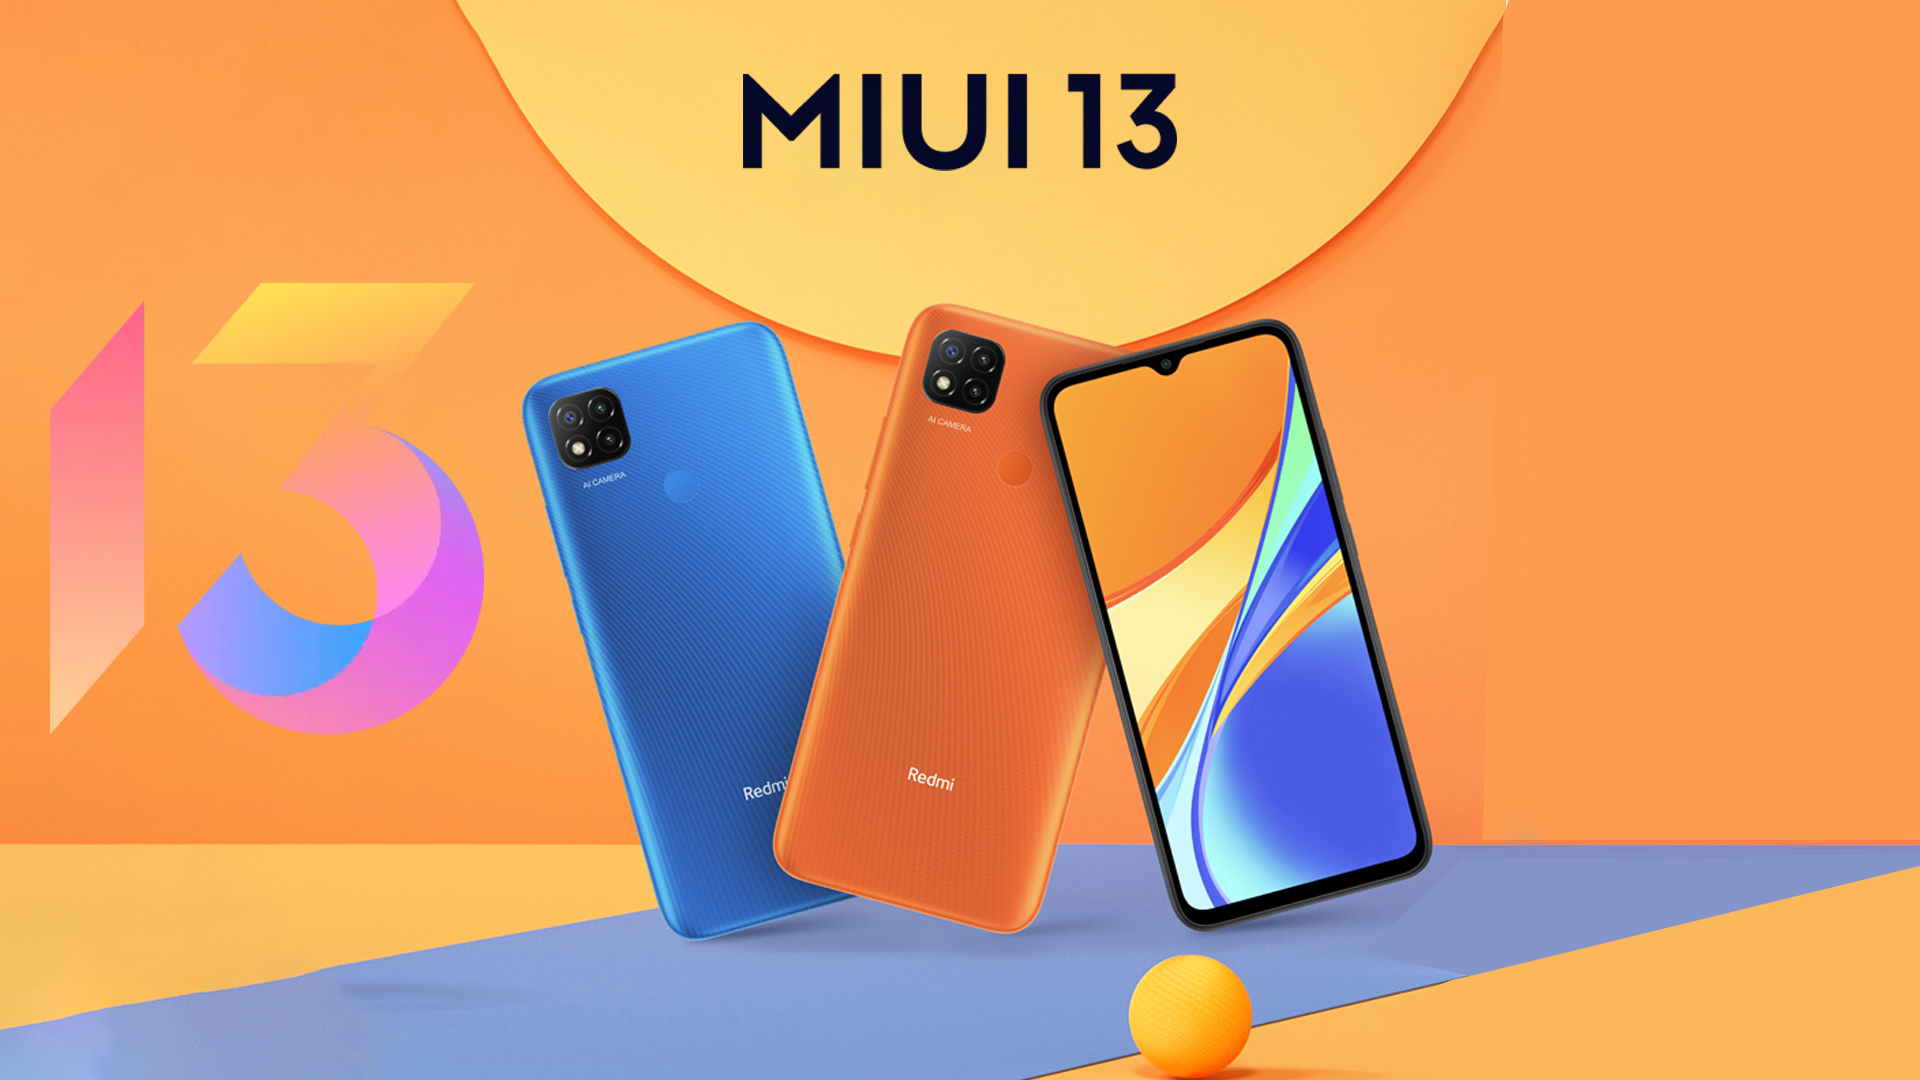 Redmi 9C NFC MIUI 12.5 update for budget devices is coming soon